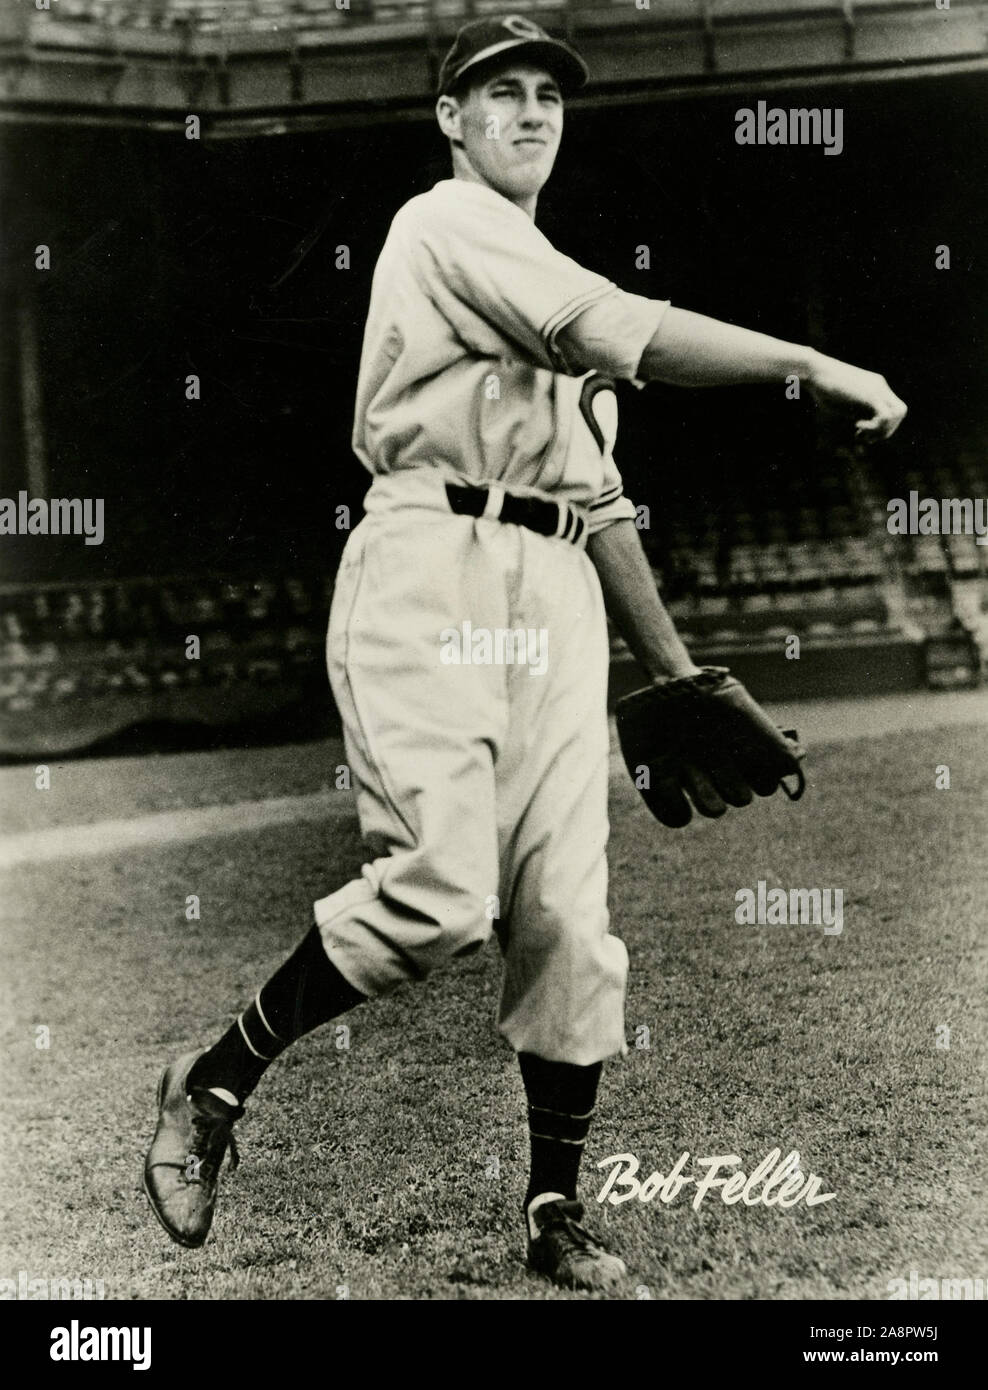 Vintage black and white photo of Hall of Fame pitcher Bob Feller with the cleveland Indians circa 1940s Stock Photo